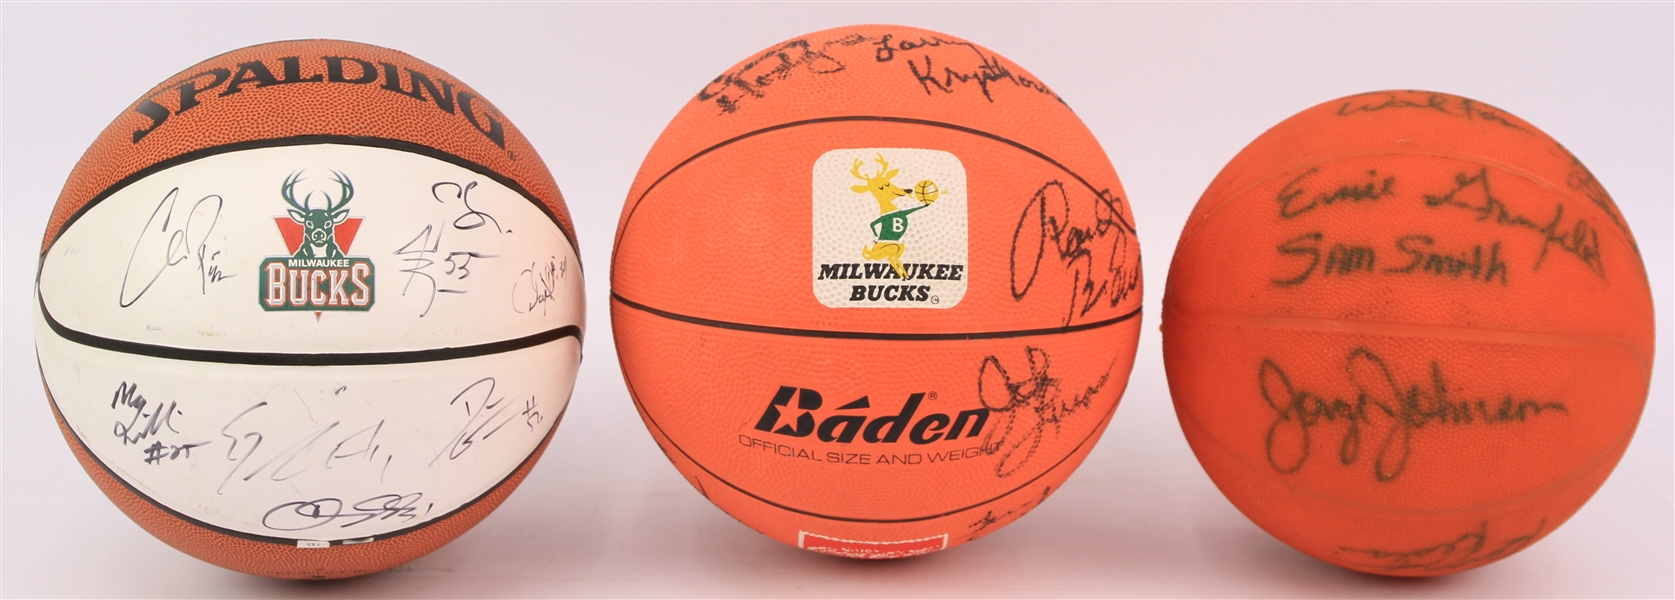 1970s-2000s Milwaukee Bucks Team Signed Basketballs - Lot of 3 w/ Brian Winters, Marques Johnson, Jack Sikma, Sidney Moncrief, Mo Williams & More (JSA)